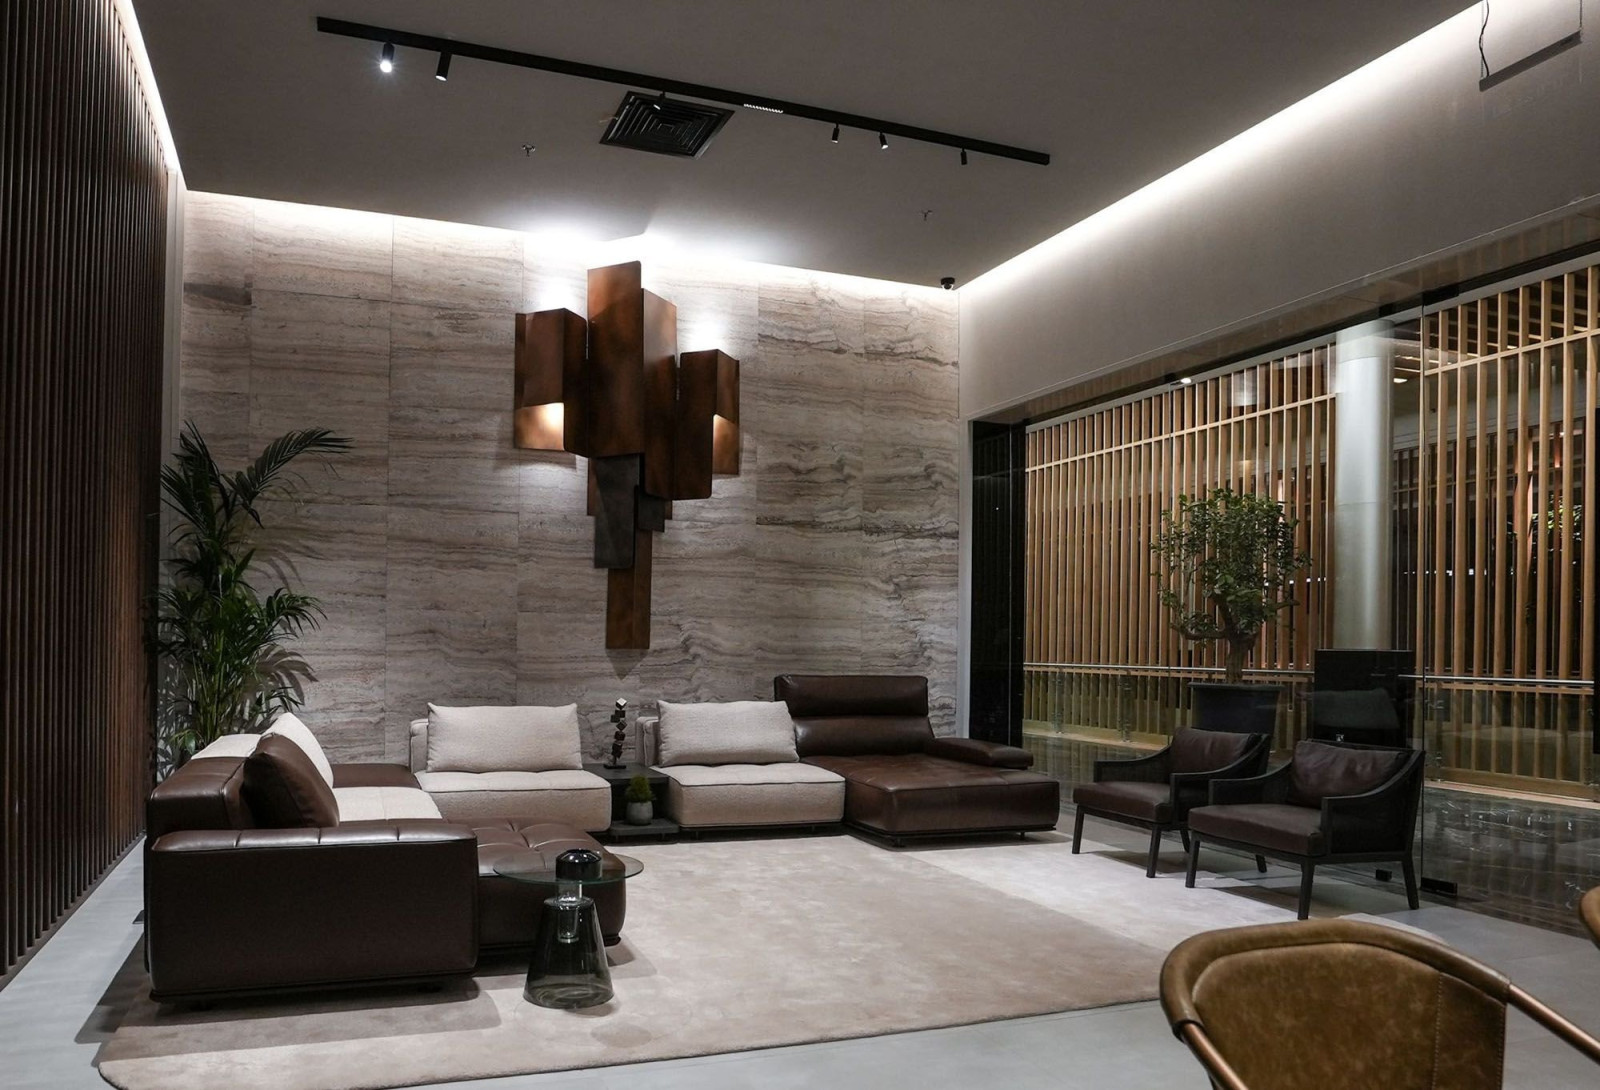 The living room and all the products represent ENNE's new Kuwait Showroom